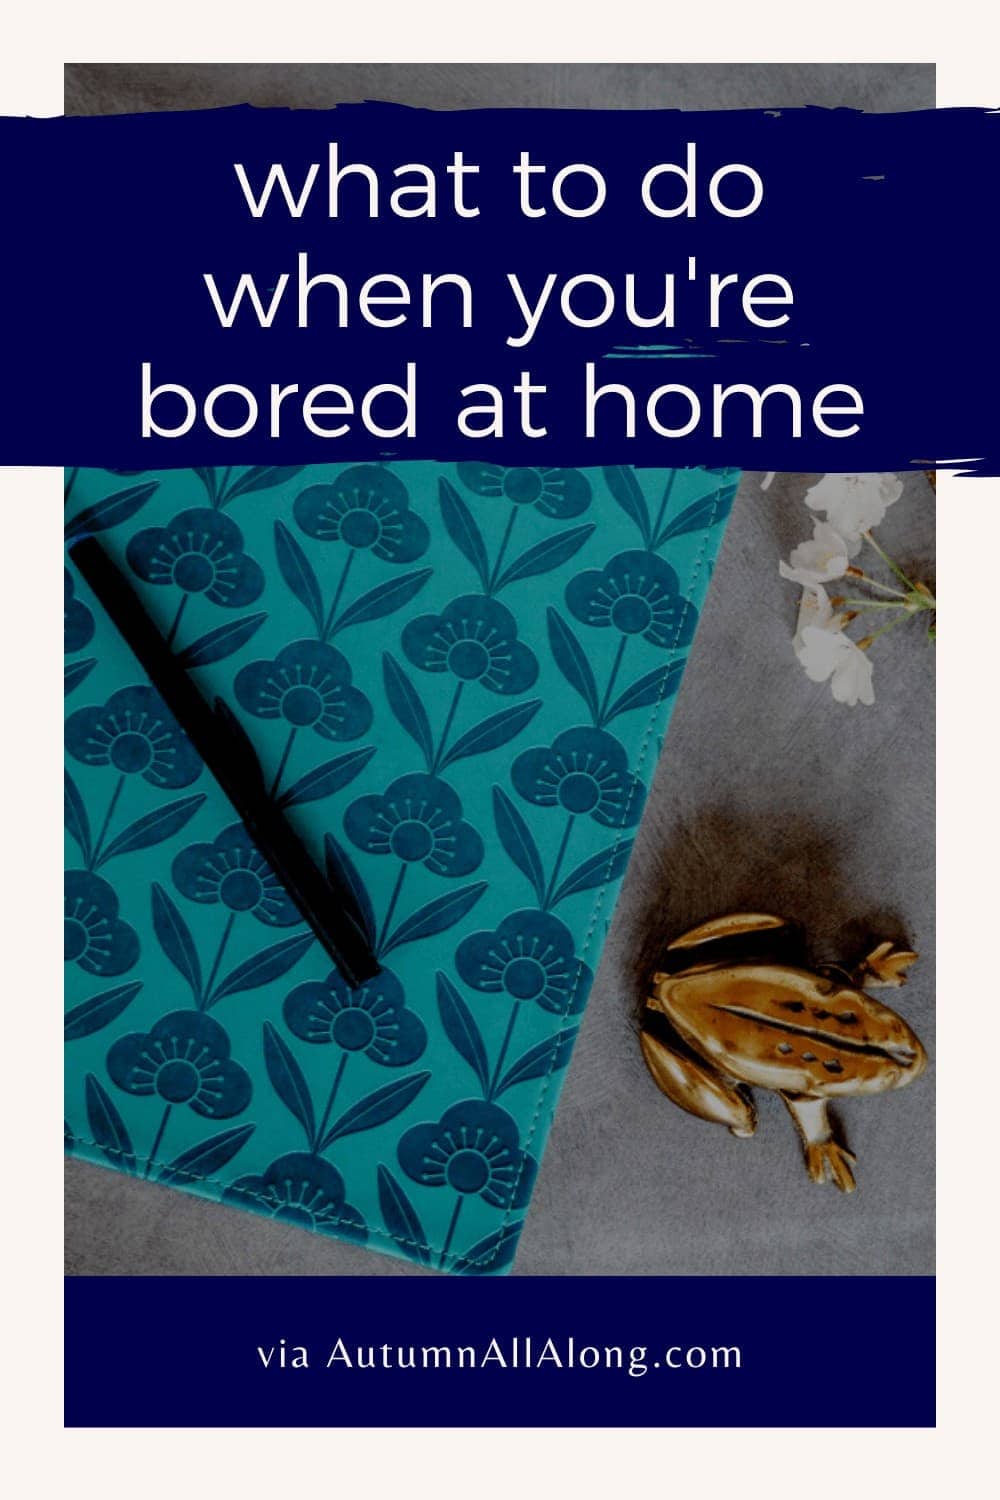 Sharing what to do when you're bored at home: activities for adults, children, and sharing what I am doing to stave off such a large change in routine. | via Autumn All Along